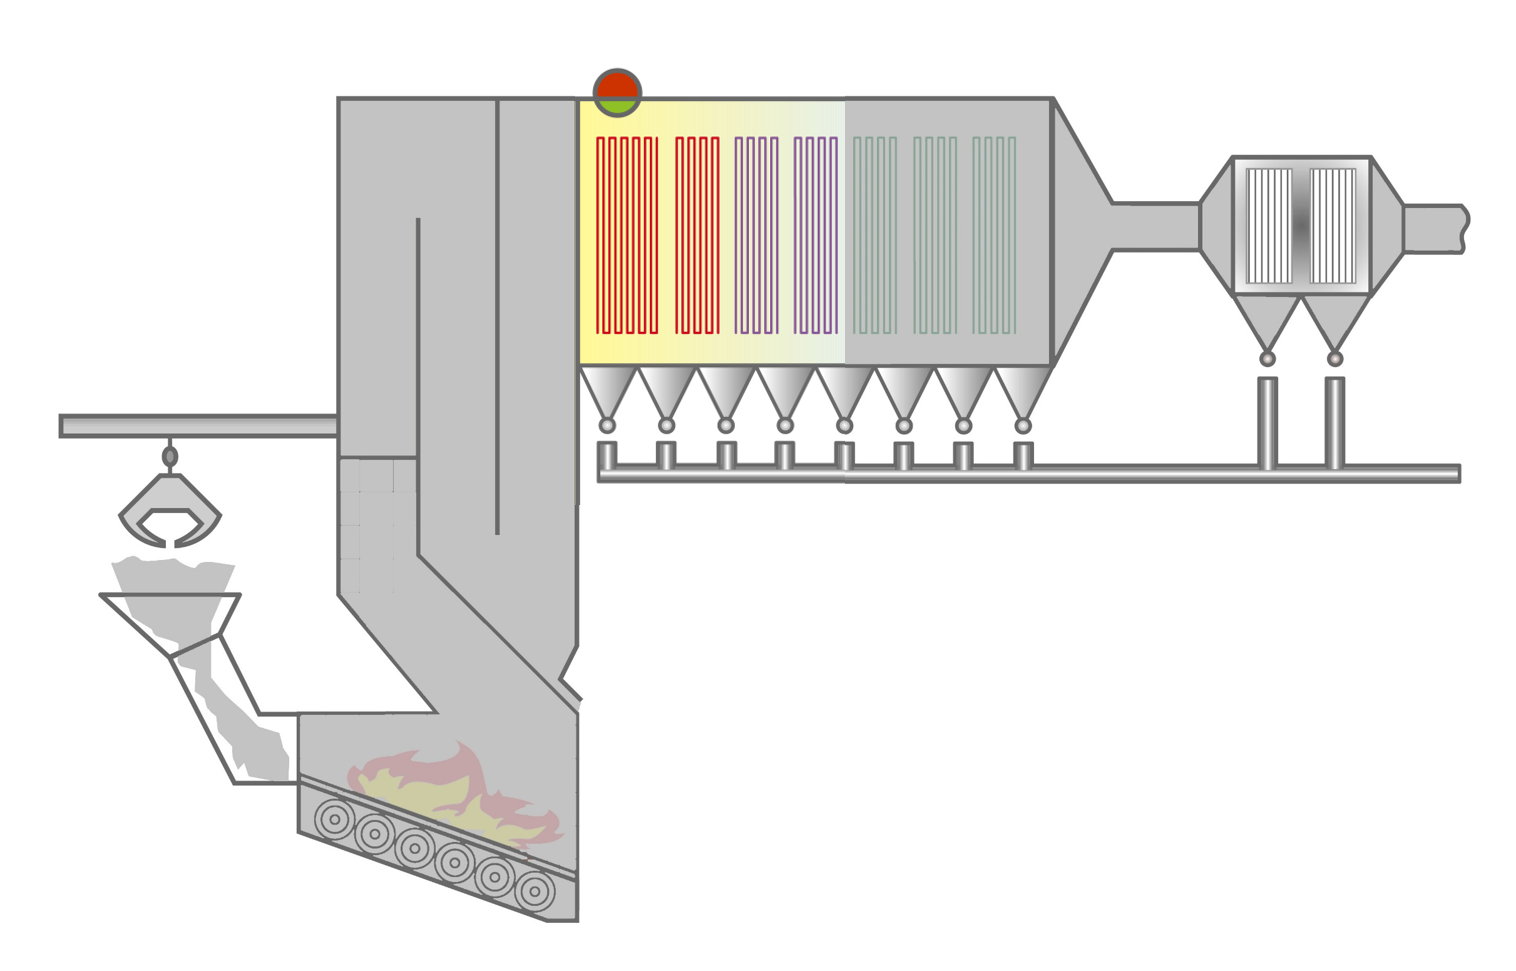 Superheater/reheater of Vertical type biomass incineration boilers